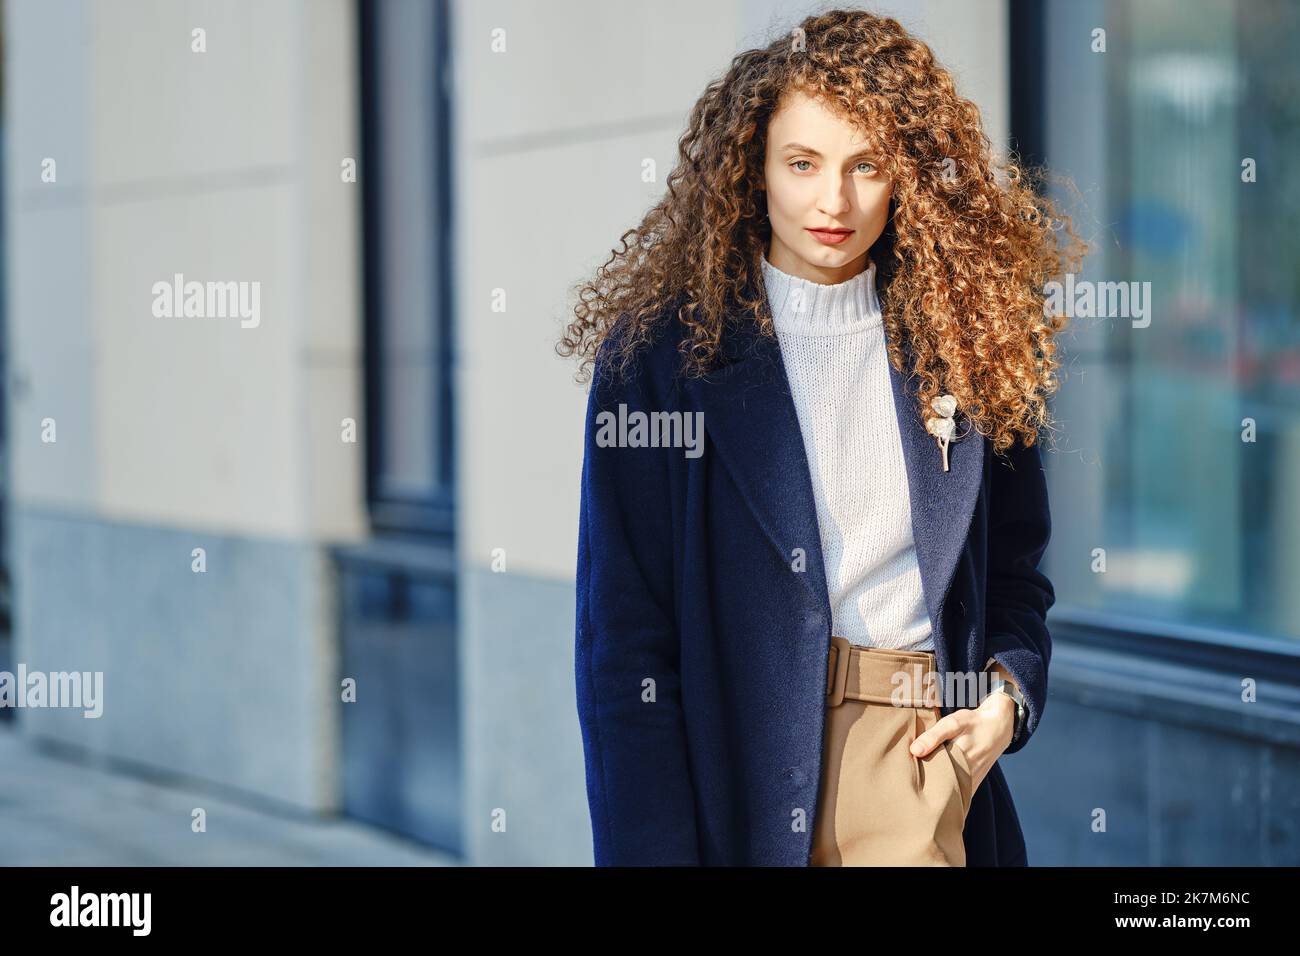 Young ambitious woman in wool coat walking on the street Stock Photo